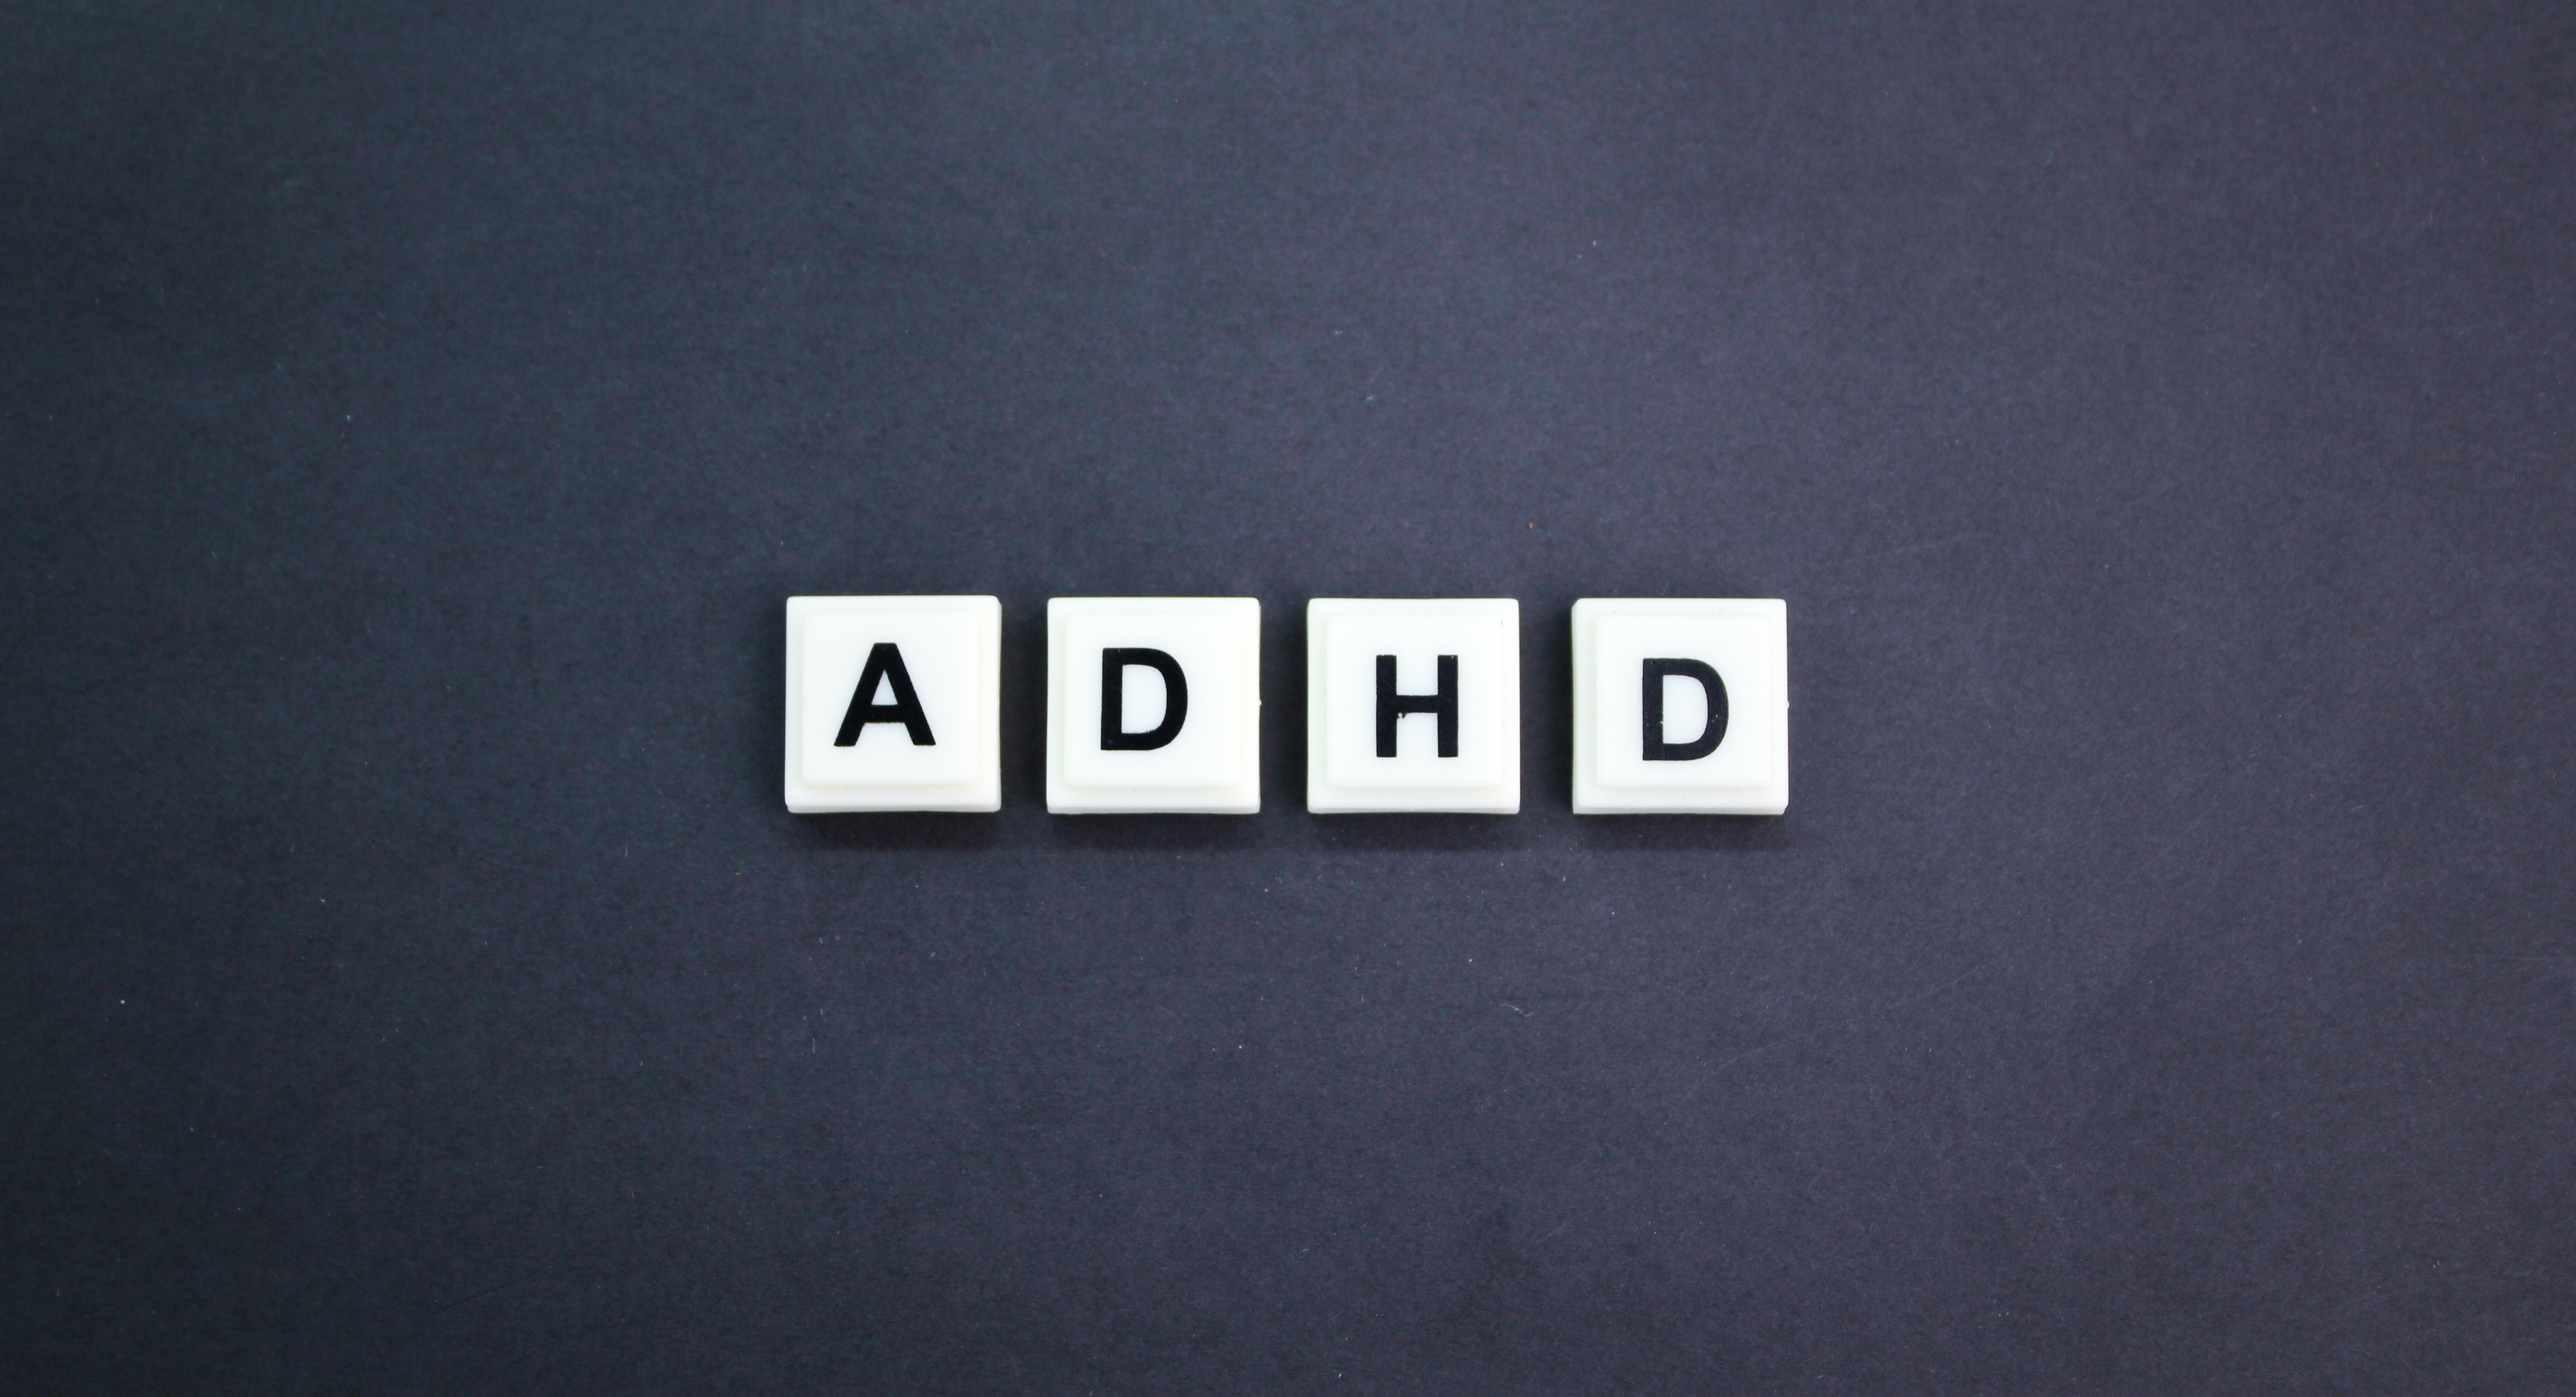 ADHD or with the word Attention deficit hyperactivity disorder.